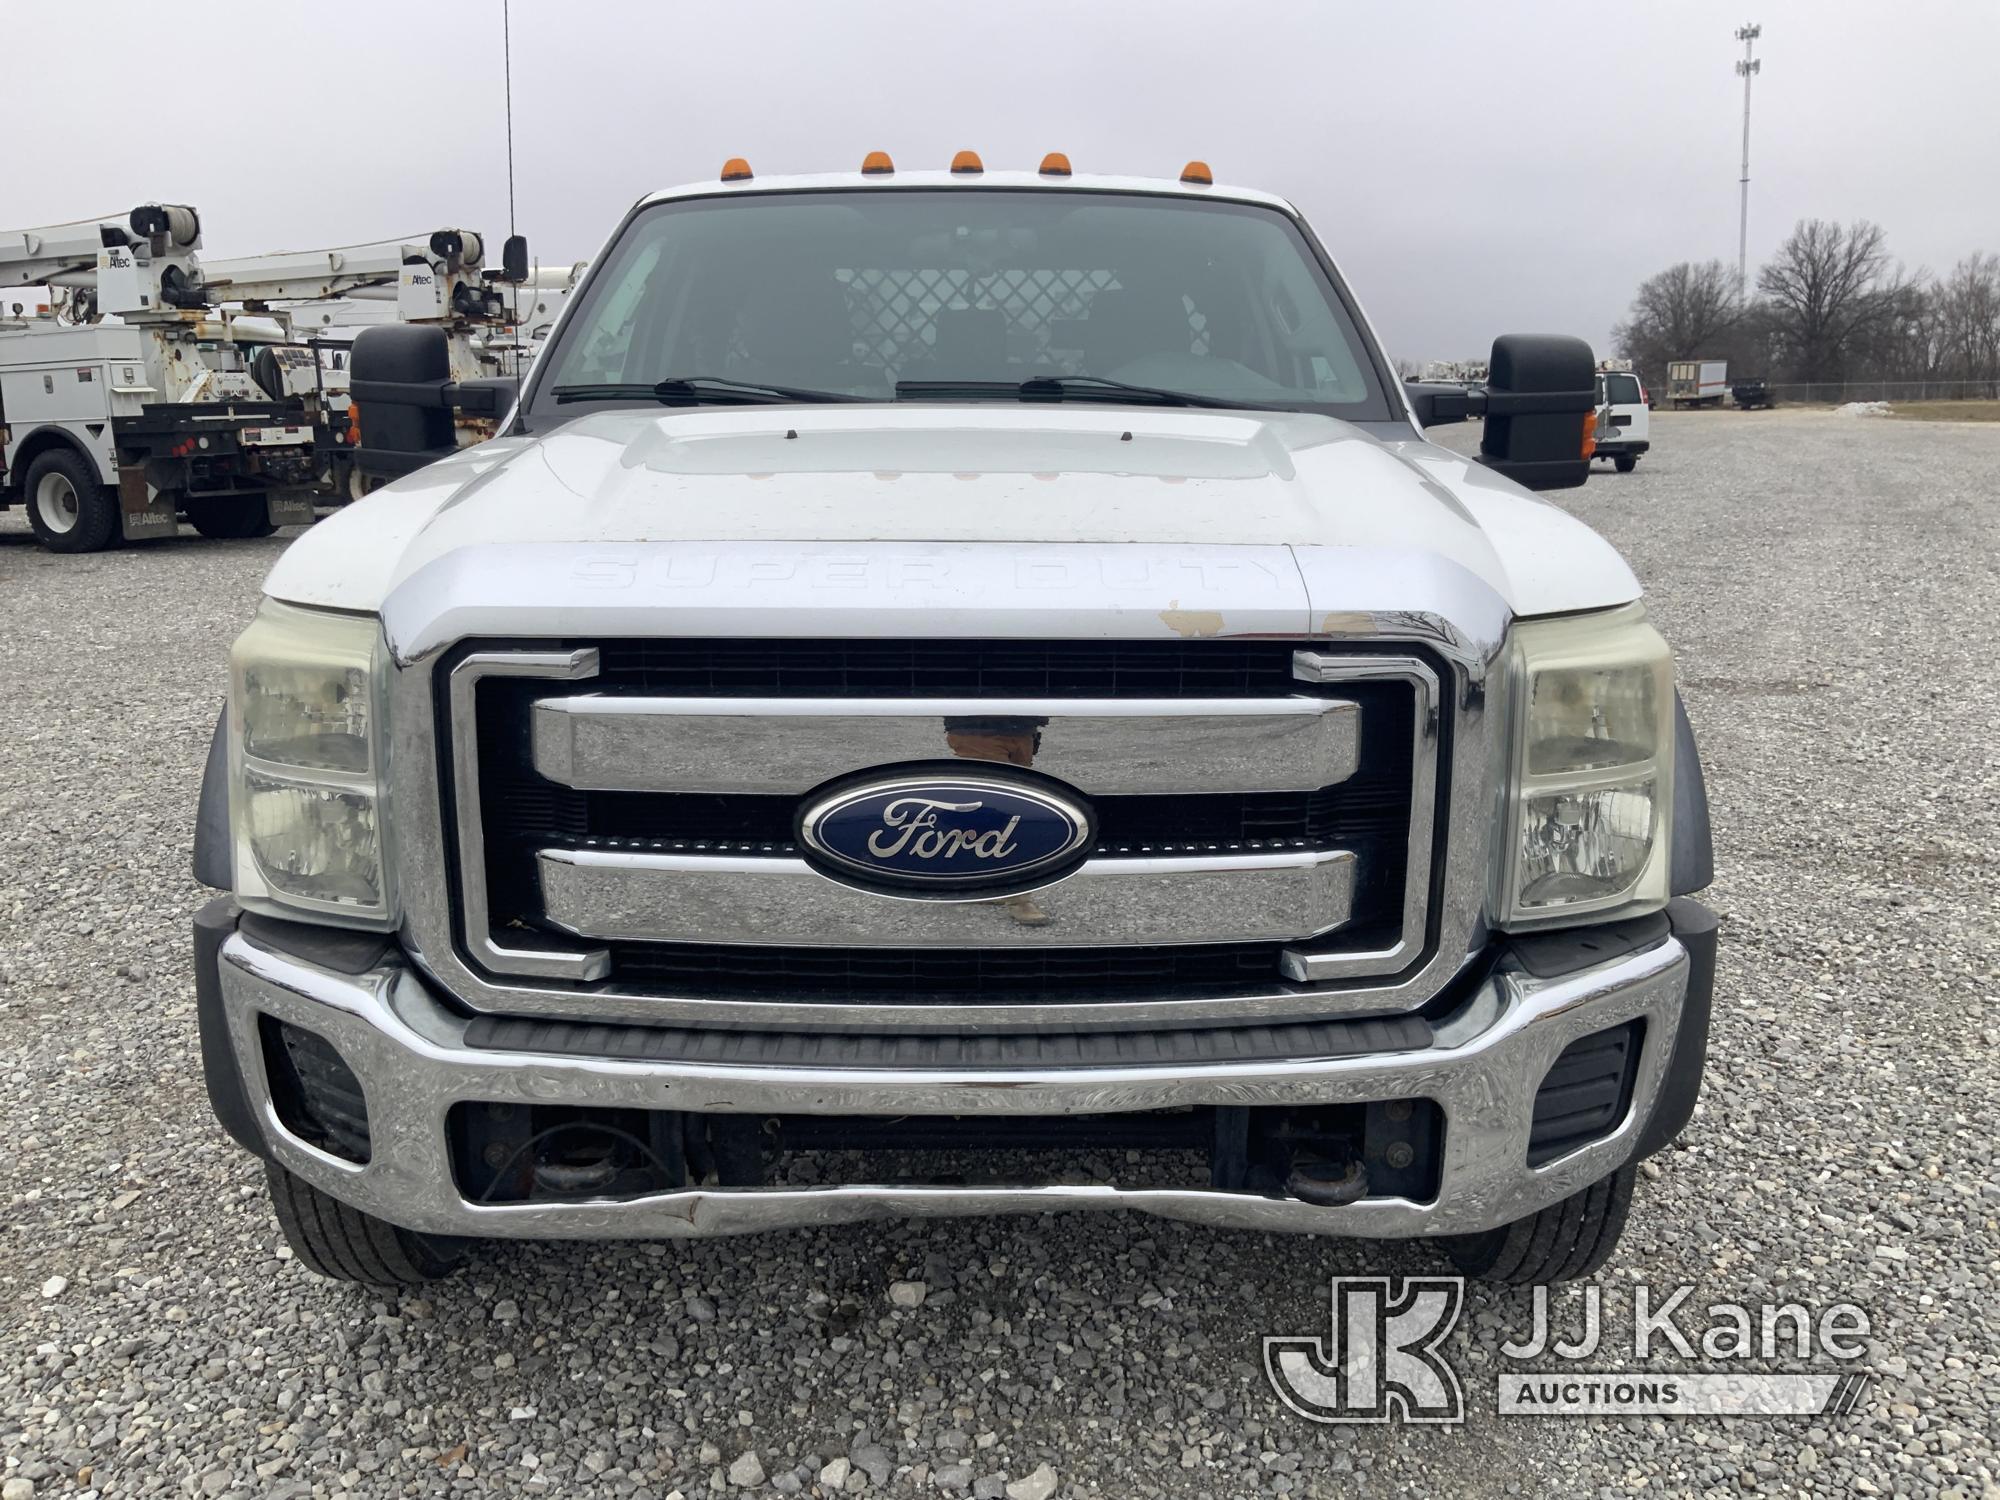 (Hawk Point, MO) 2011 Ford F550 Flatbed Truck Runs & moves) (Body & Paint Damage. Seller States: DEF